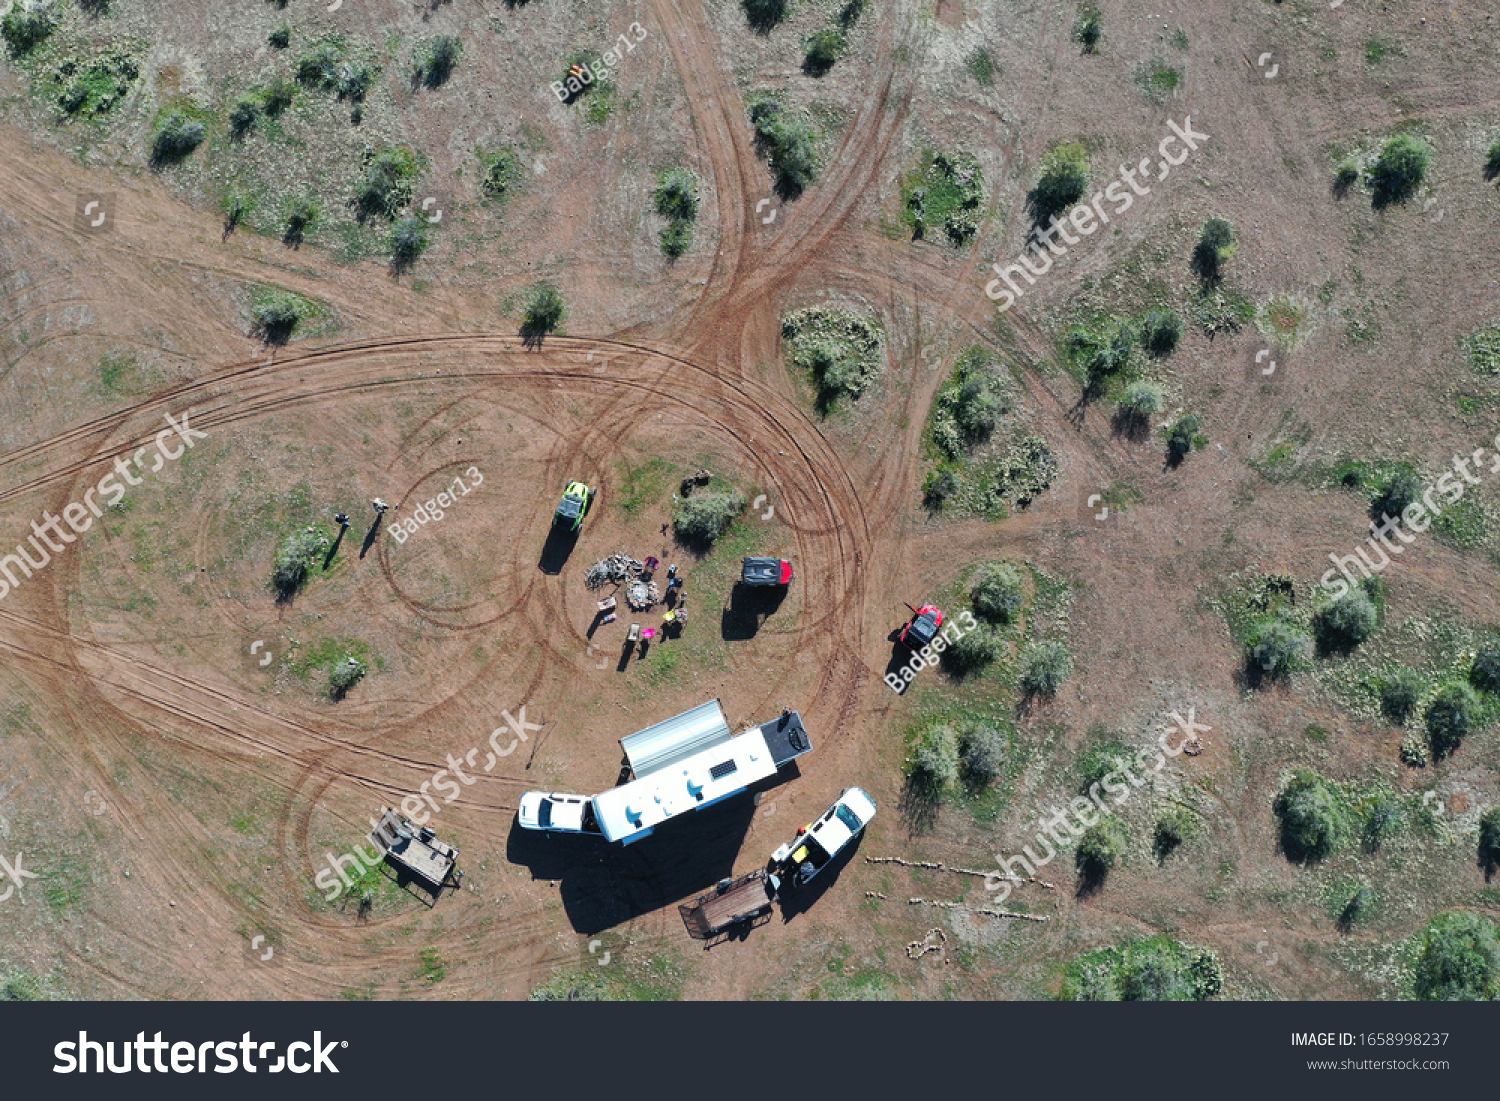 Aerial view of campers boondocking in the desert. #1658998237